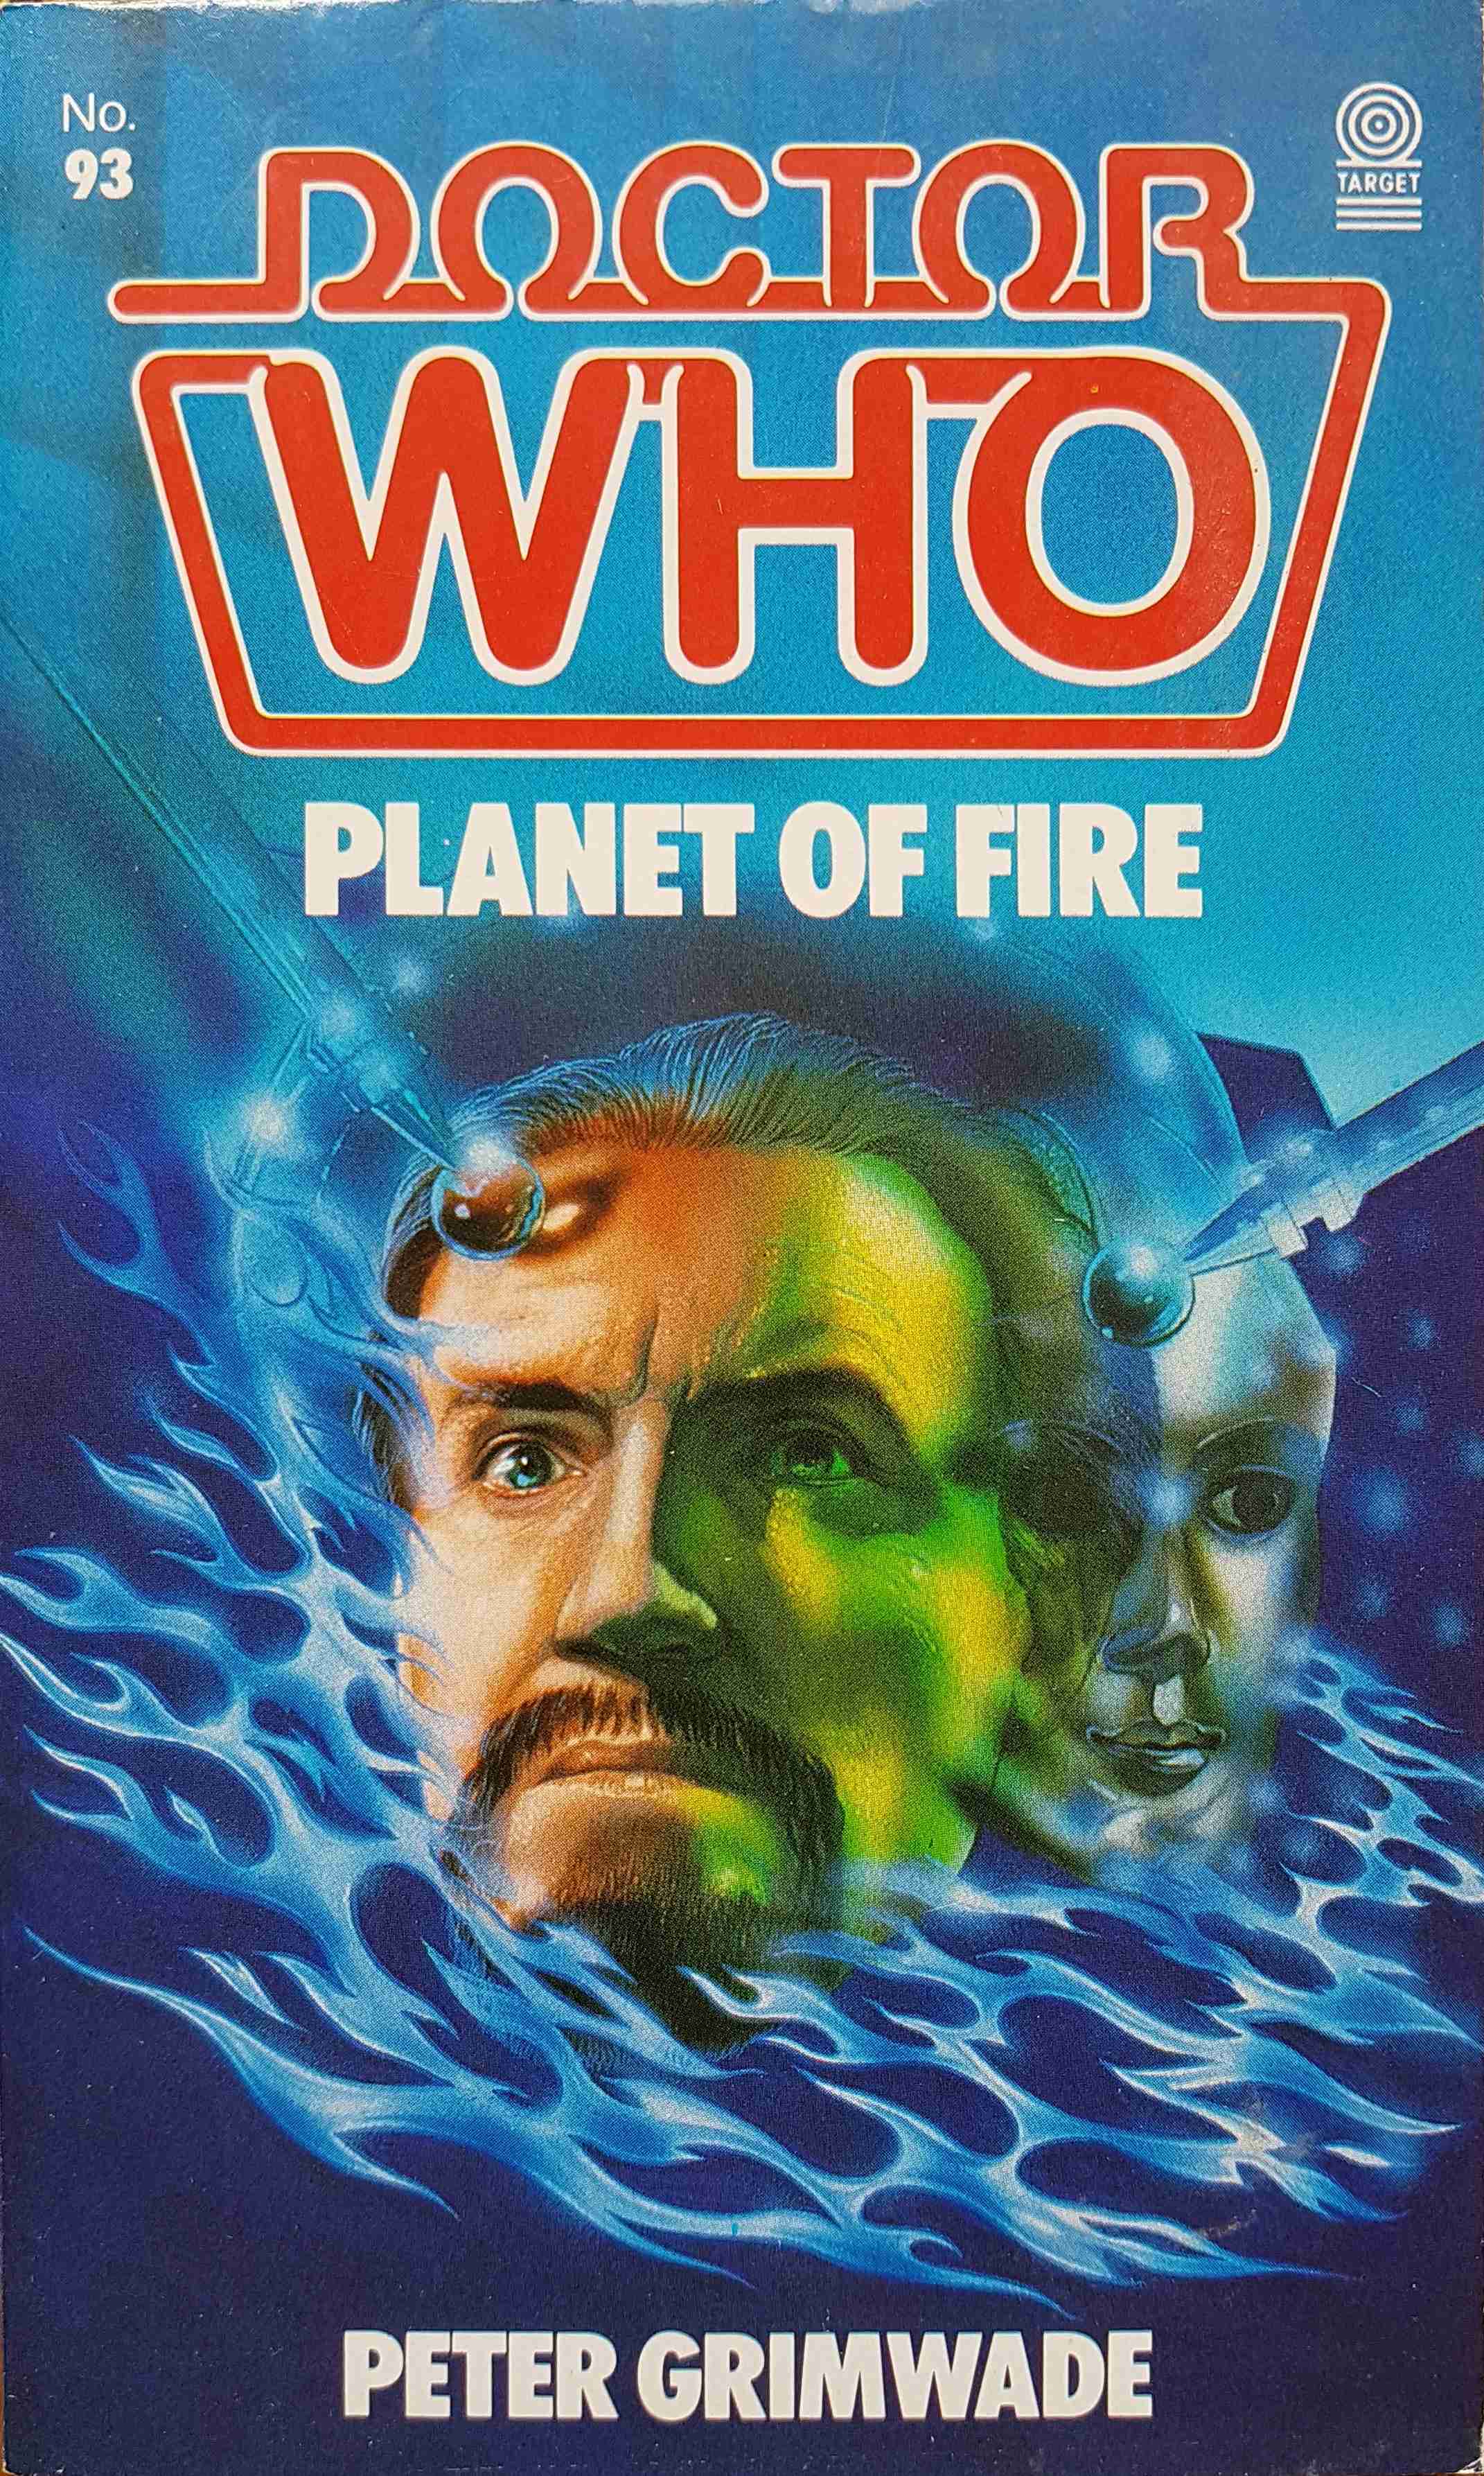 Picture of Doctor Who - Planet of fire by artist Peter Grimwade from the BBC books - Records and Tapes library